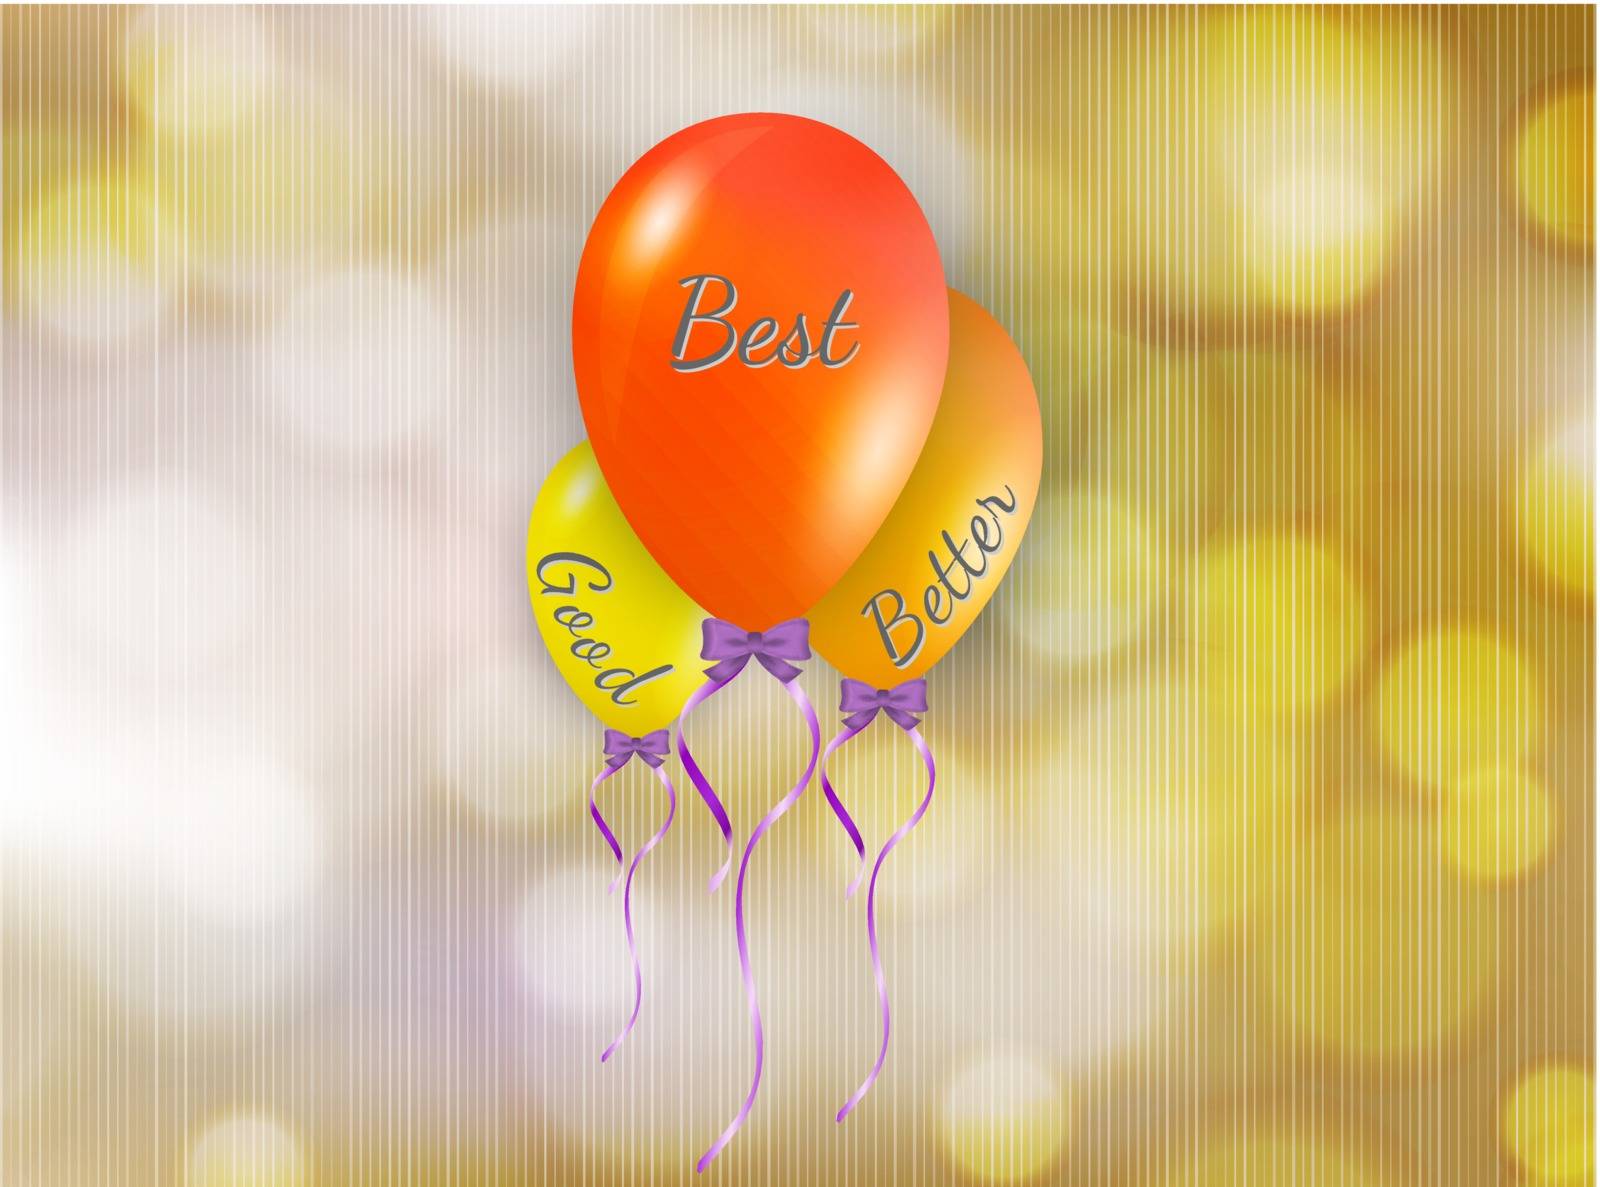 good better and best color balloons on yellow background